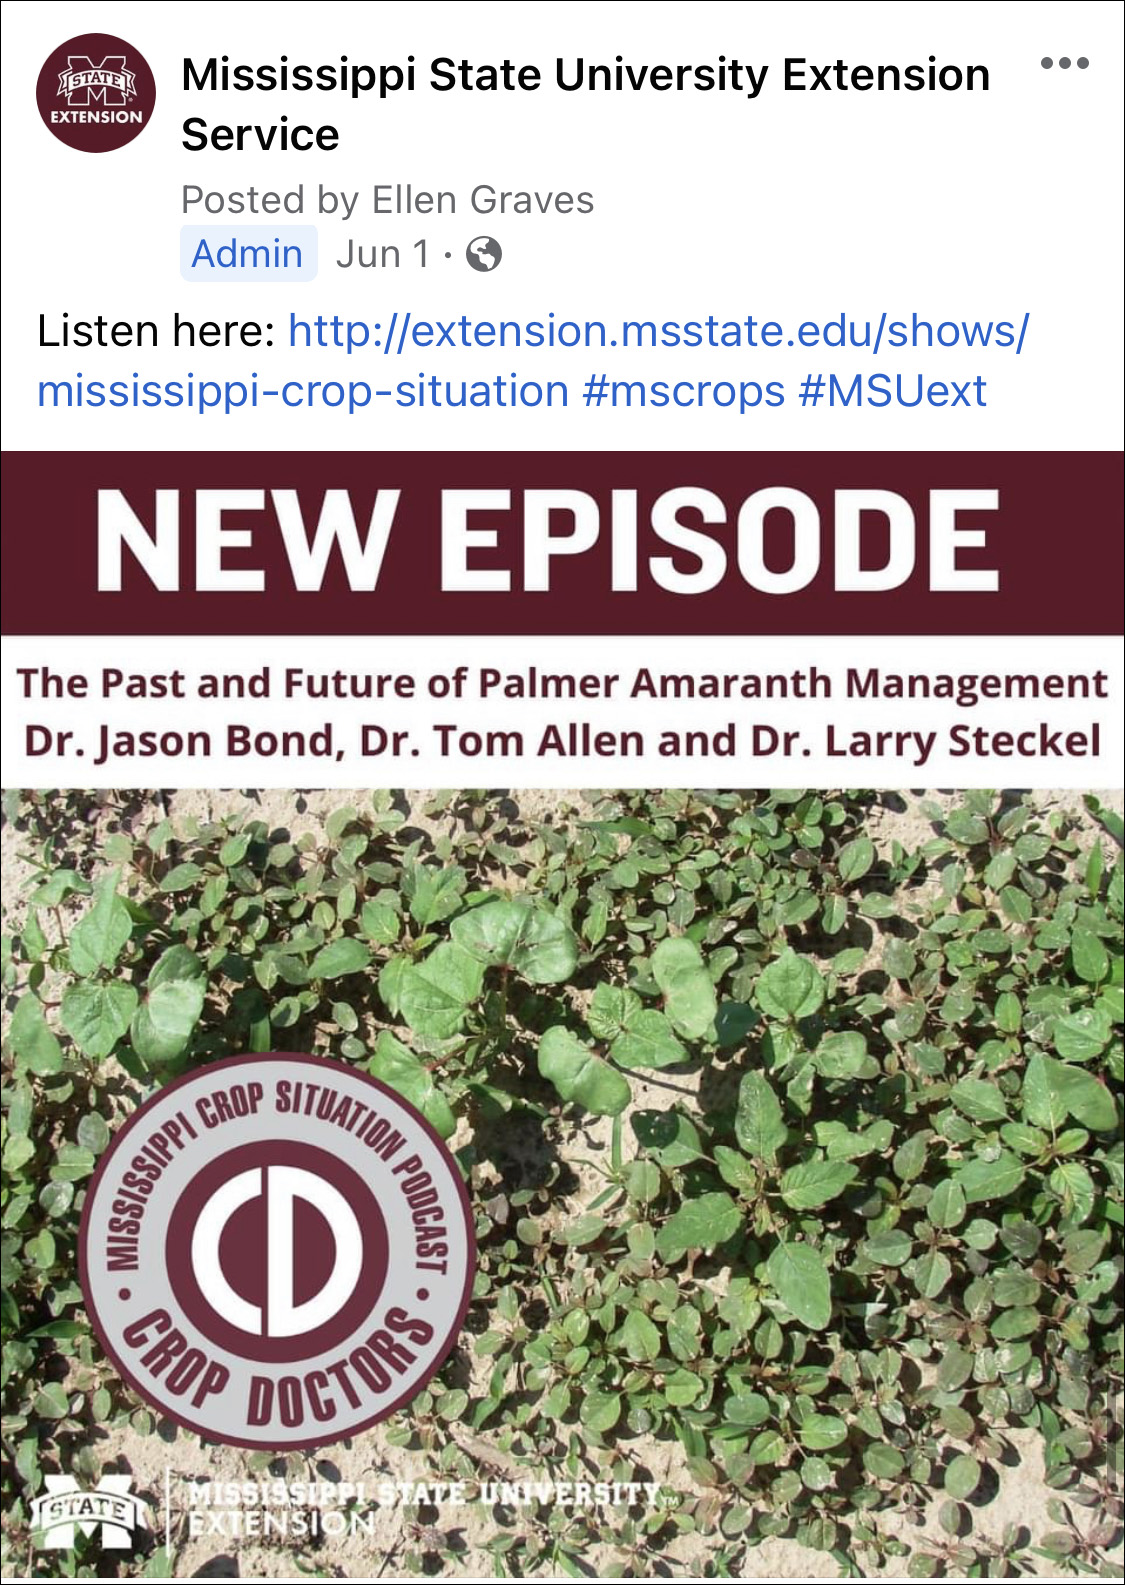 A Facebook post from MSU Extension advertising a podcast.